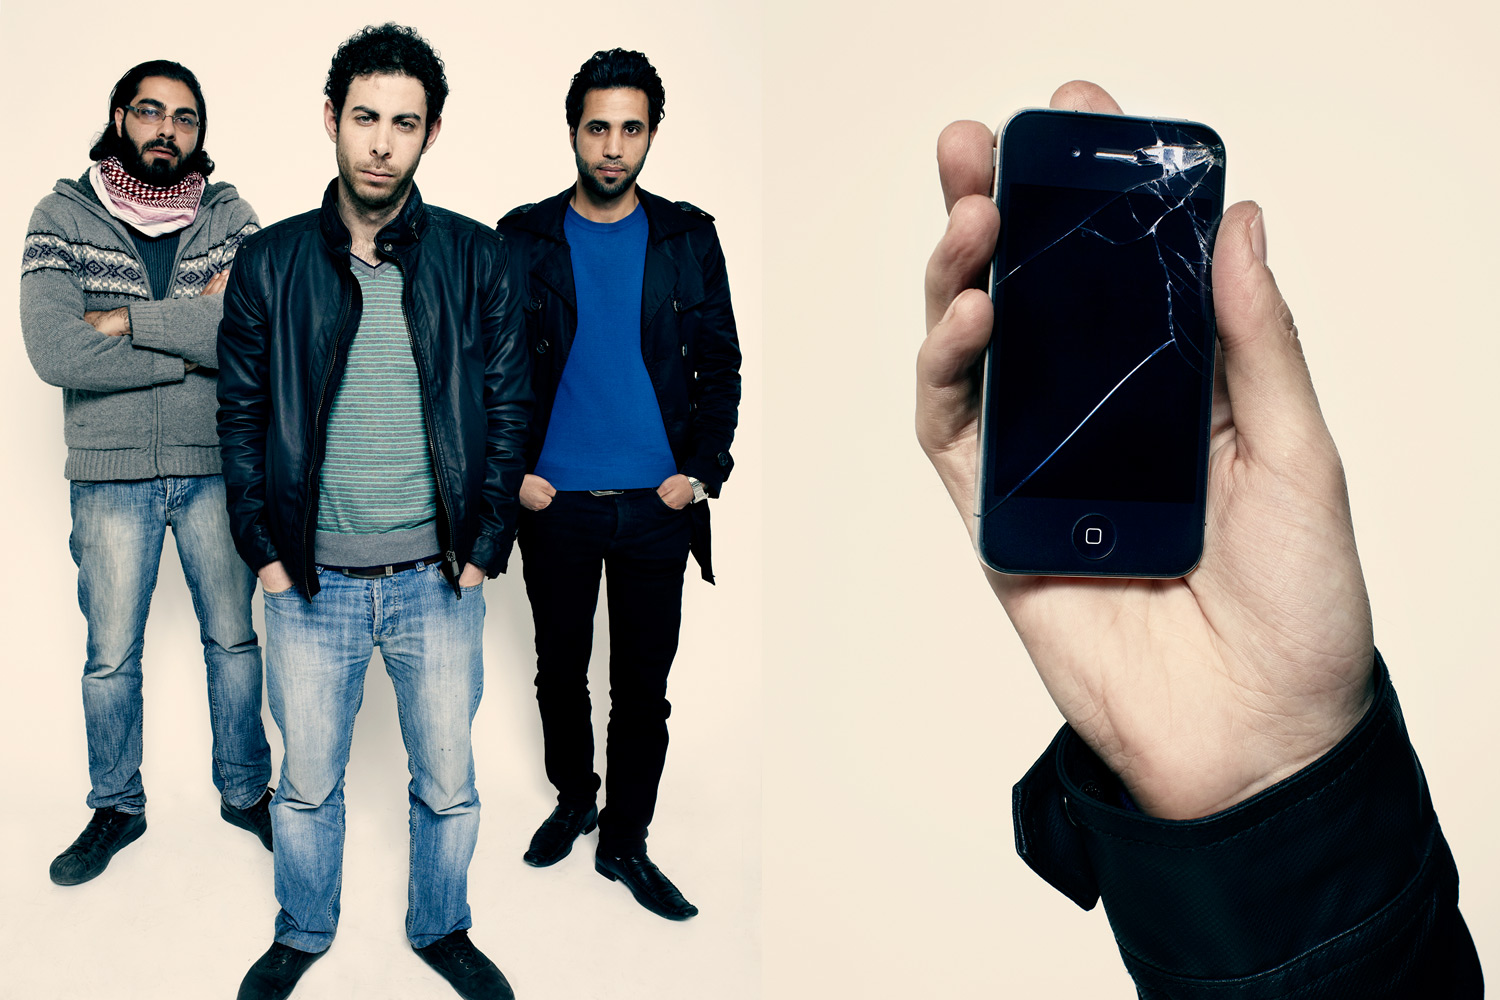 Syrian activists Abdul Hamid Sulaiman, Rami Jarrah and Mohamed Abazid all fled the country.  I was tortured for three days, and that’s when I became more active and started using a pseudonym,  Jarrah says. Right, his damaged iPhone.